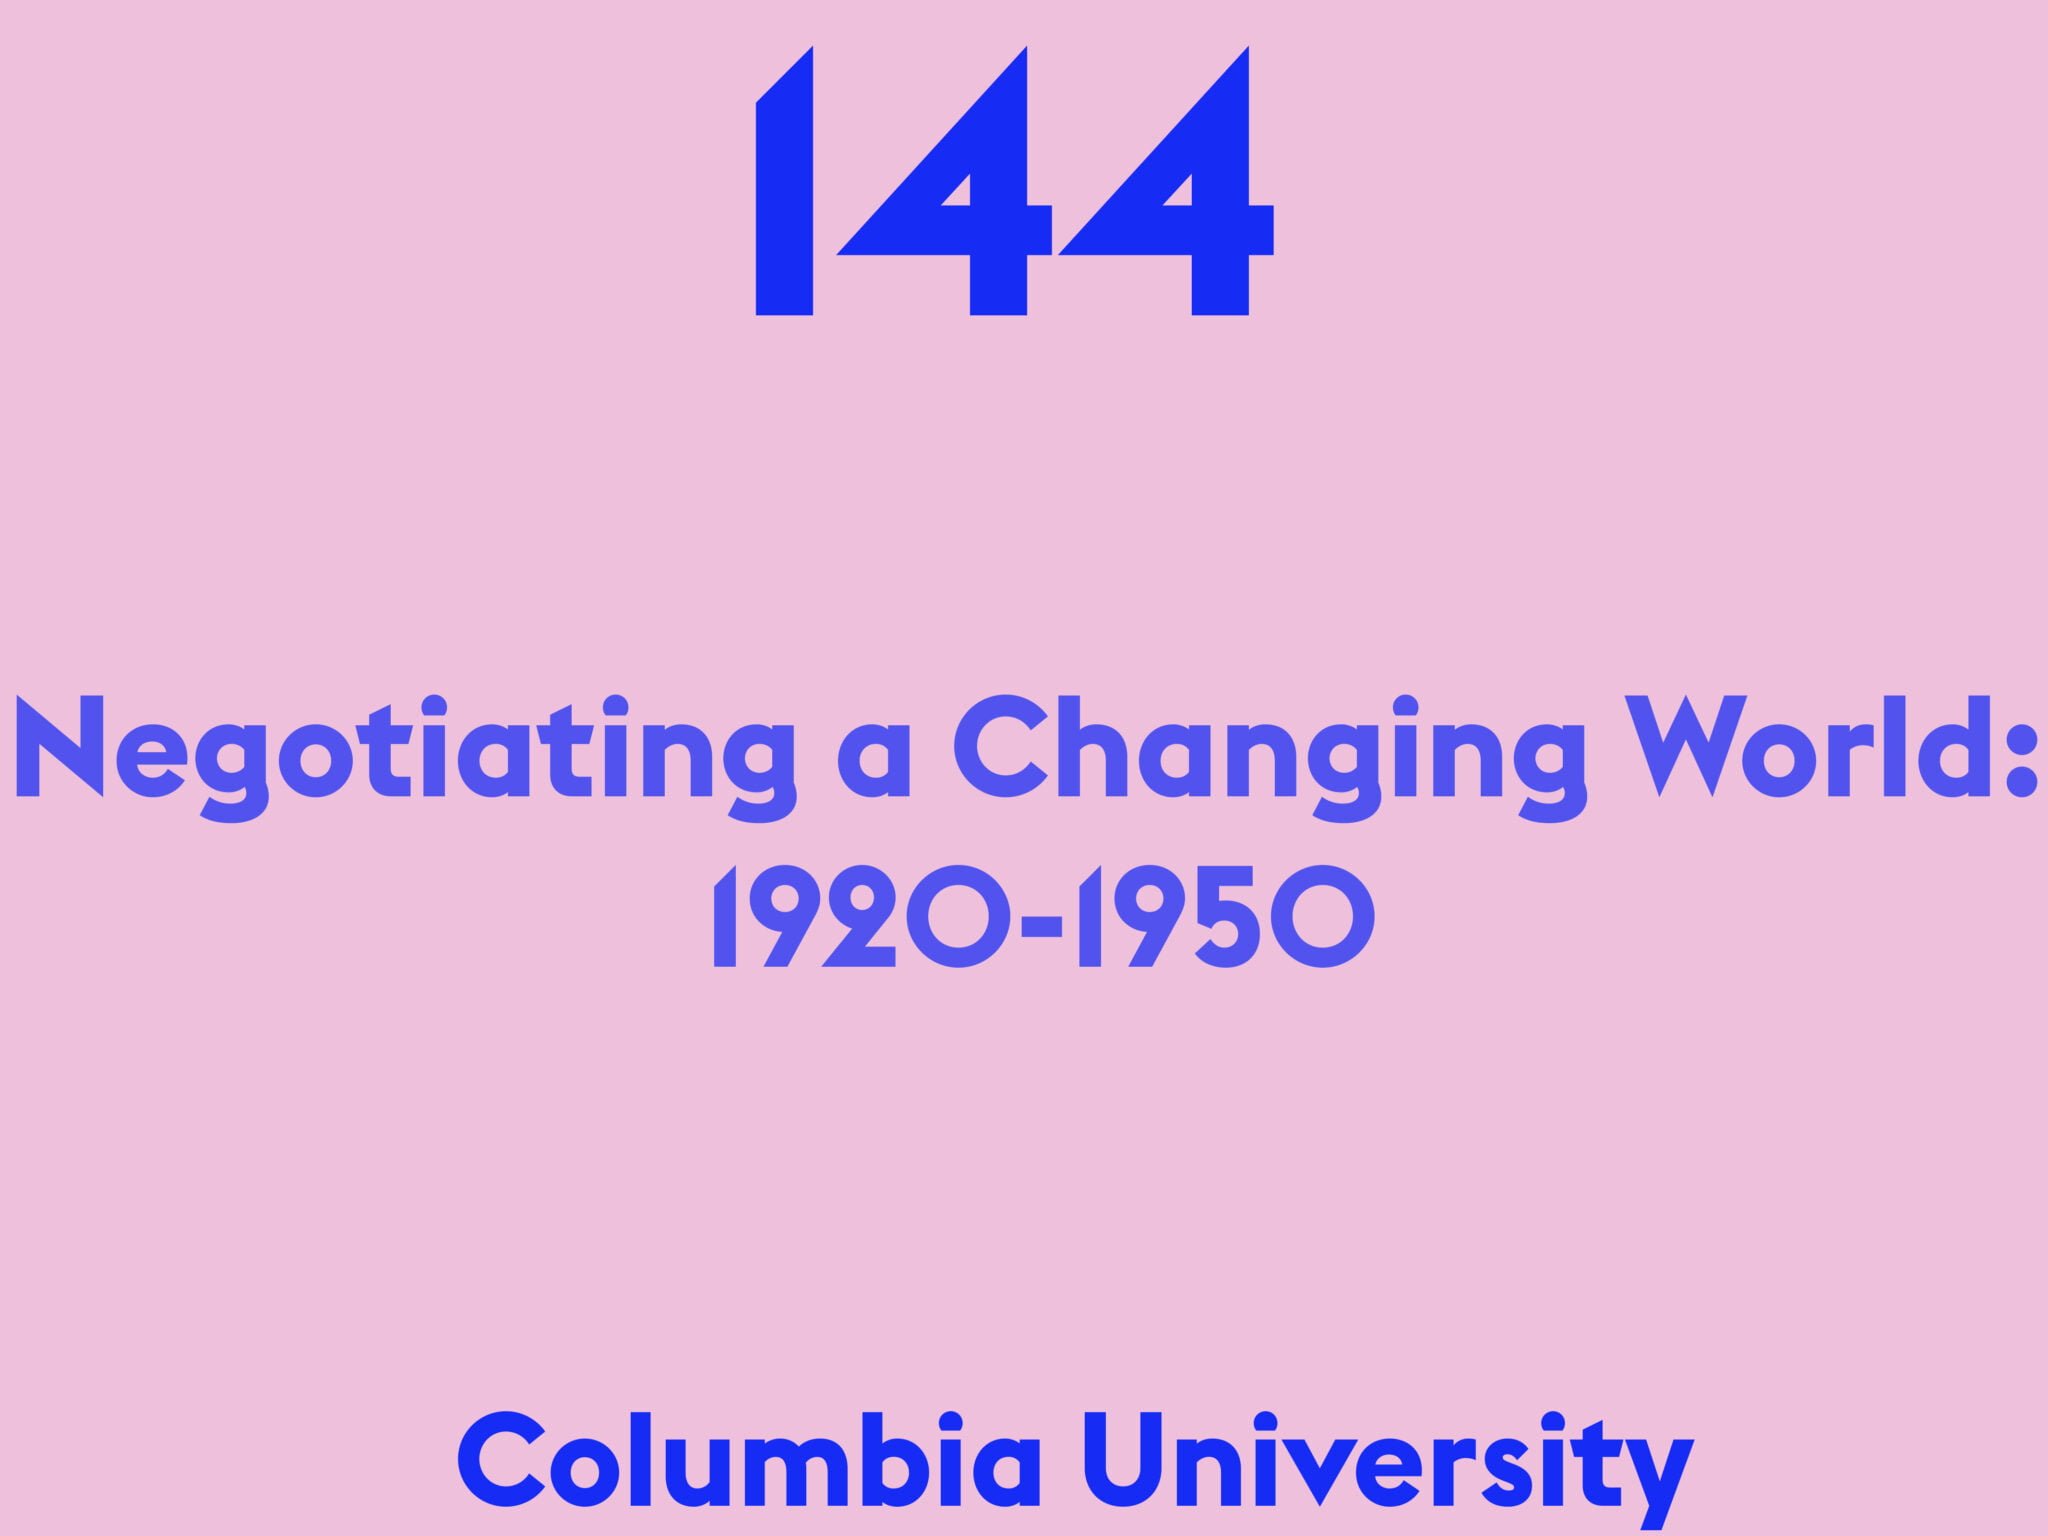 Negotiating a Changing World: 1920-1950